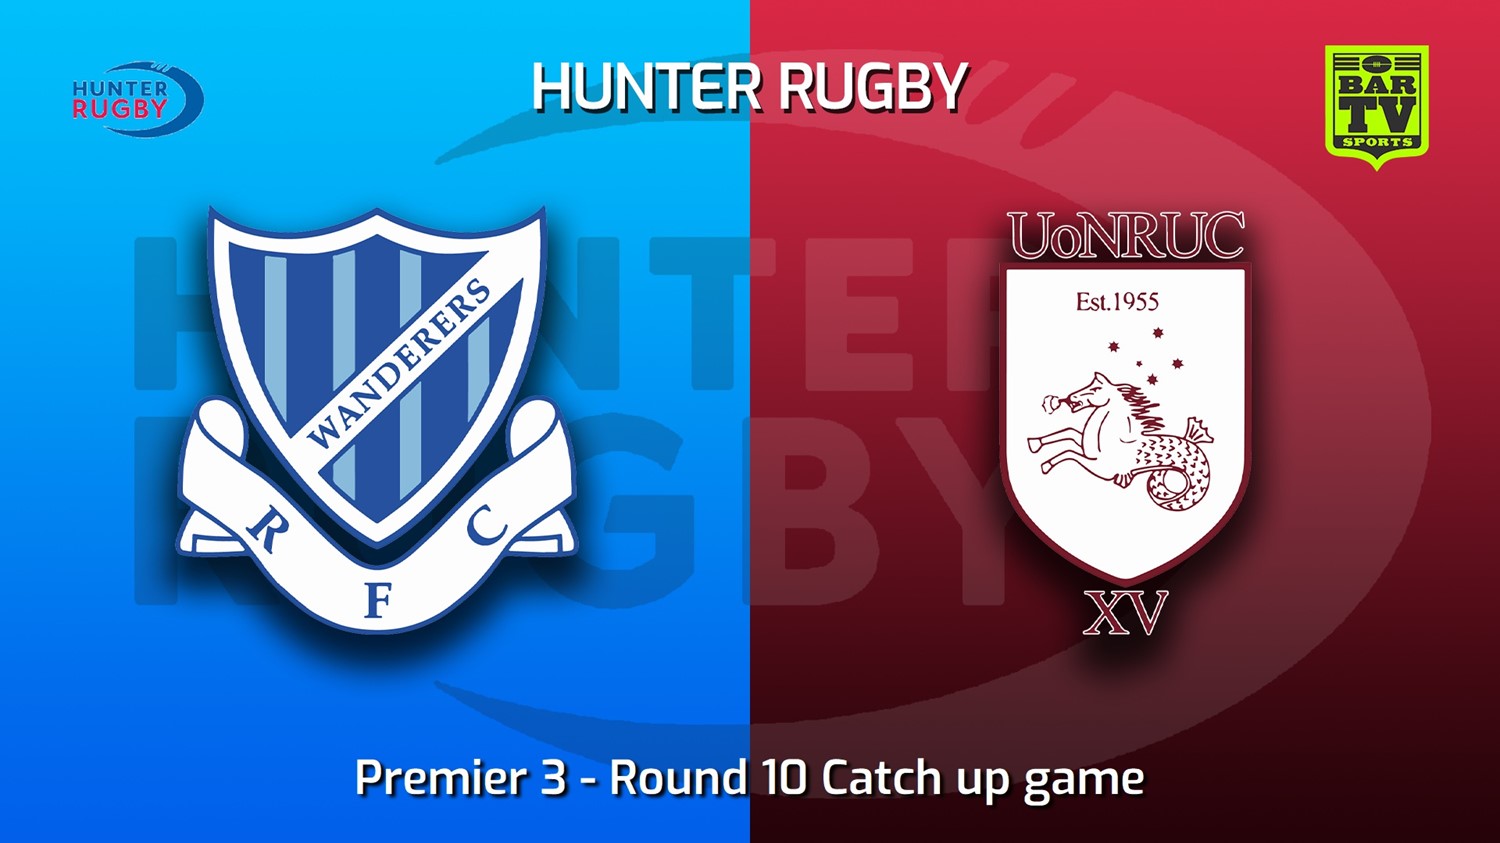 220817-Hunter Rugby Round 10 Catch up game - Premier 3 - Wanderers v University Of Newcastle Slate Image